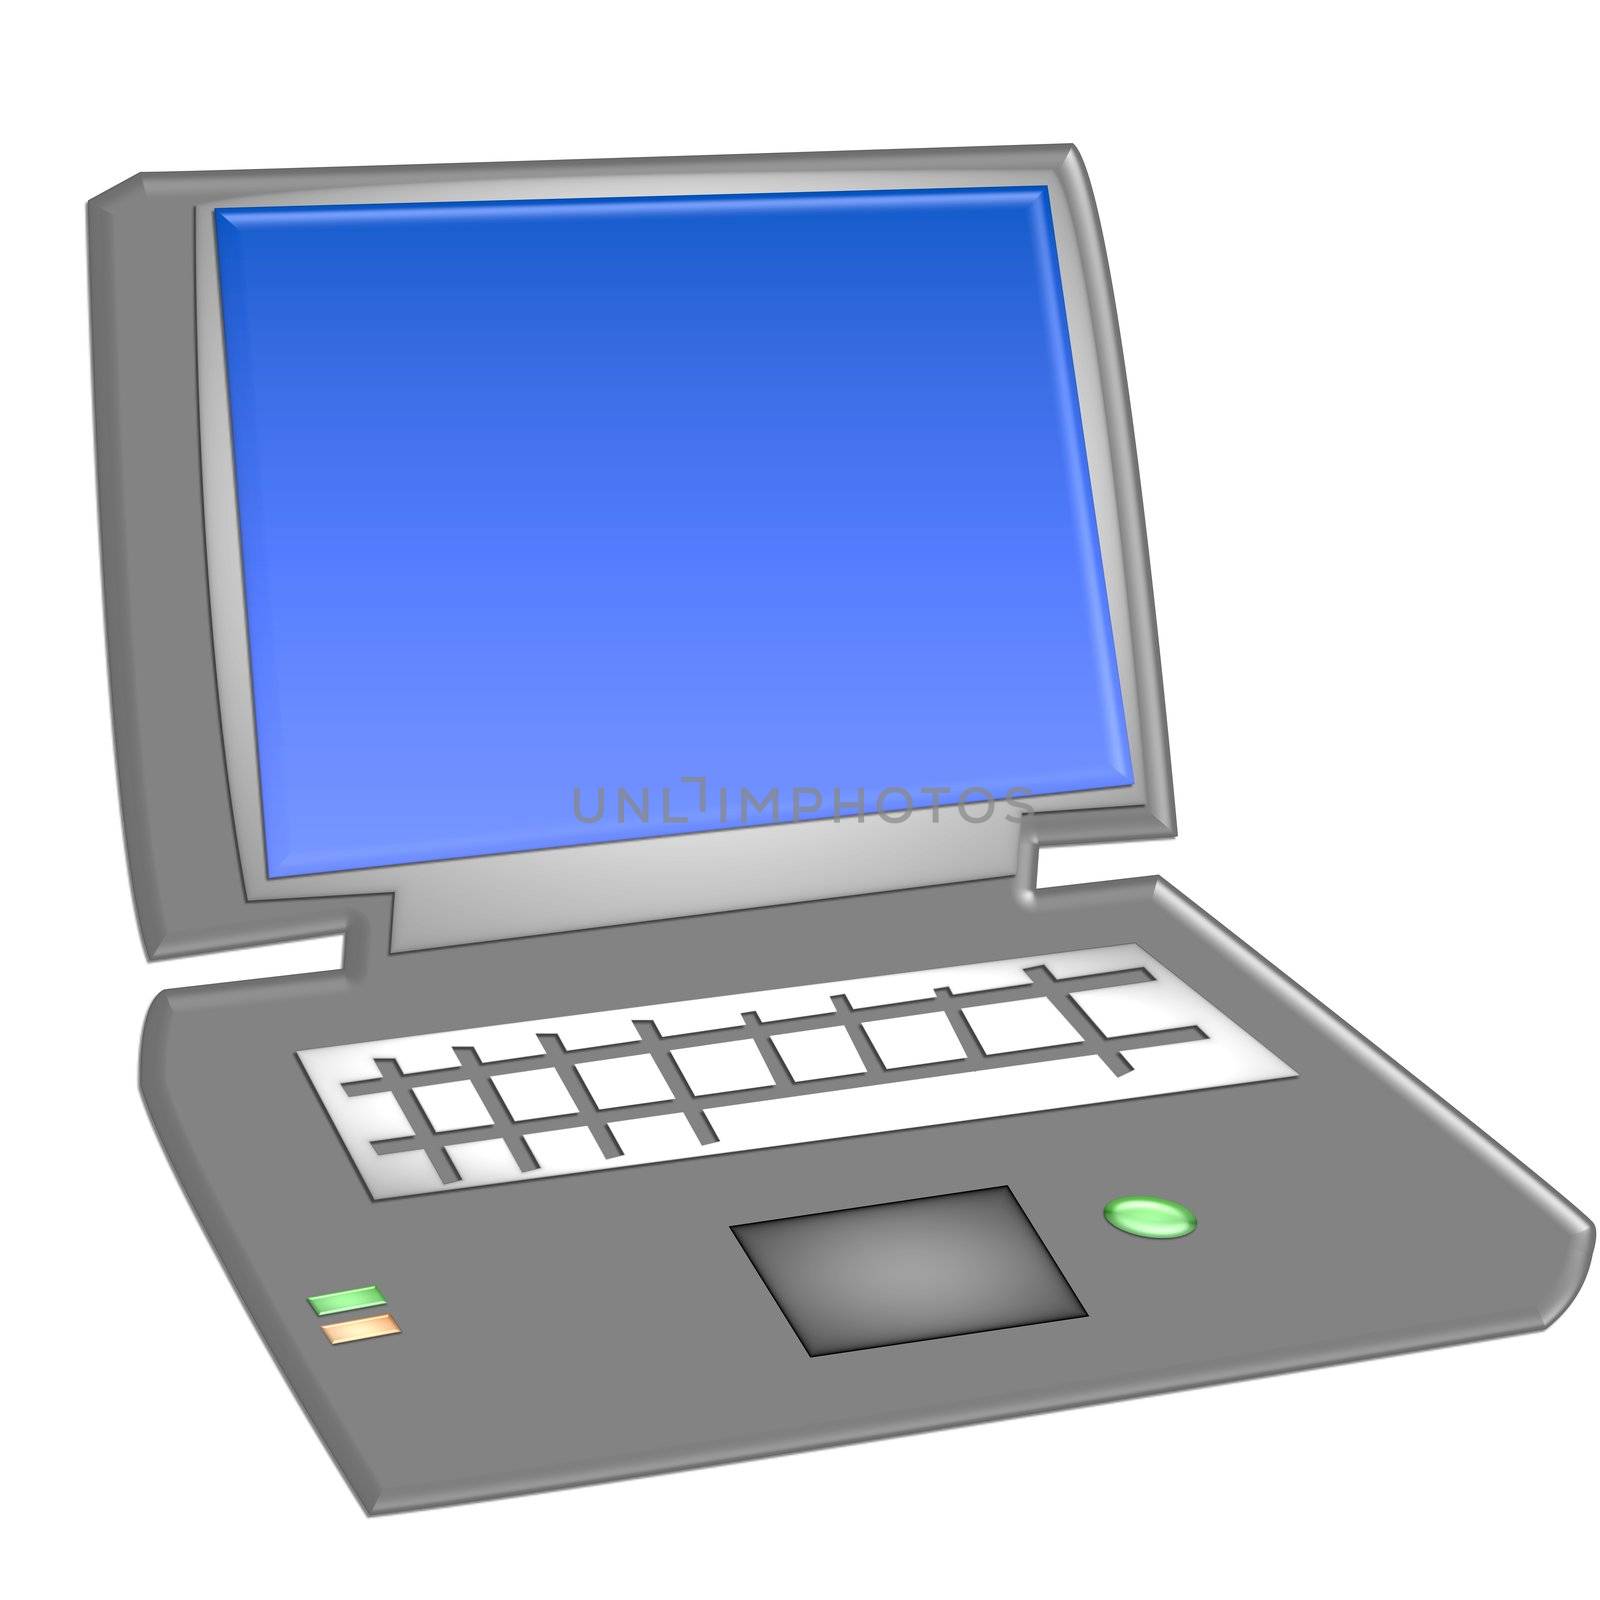 illustration of a laptop computer by peromarketing